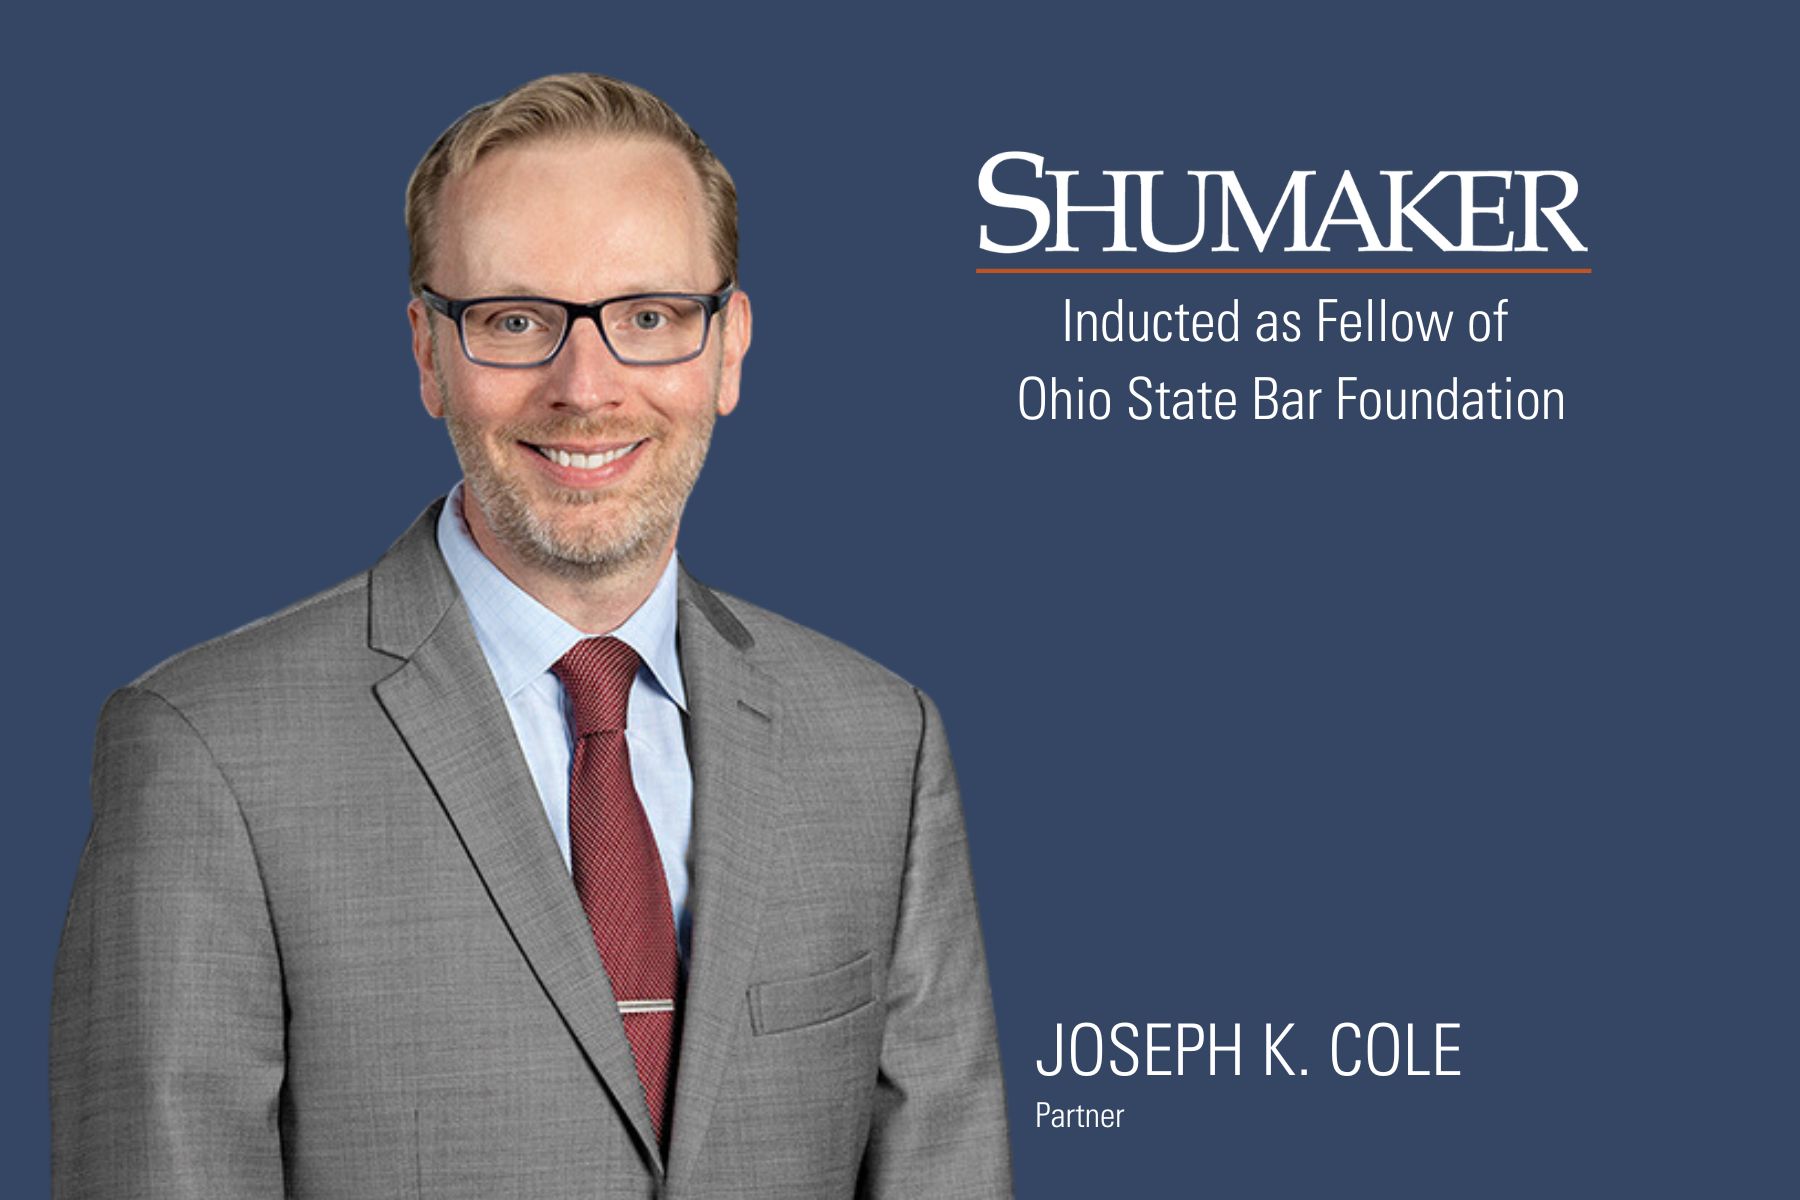 Joseph K. Cole Inducted as Fellow of Ohio State Bar Foundation